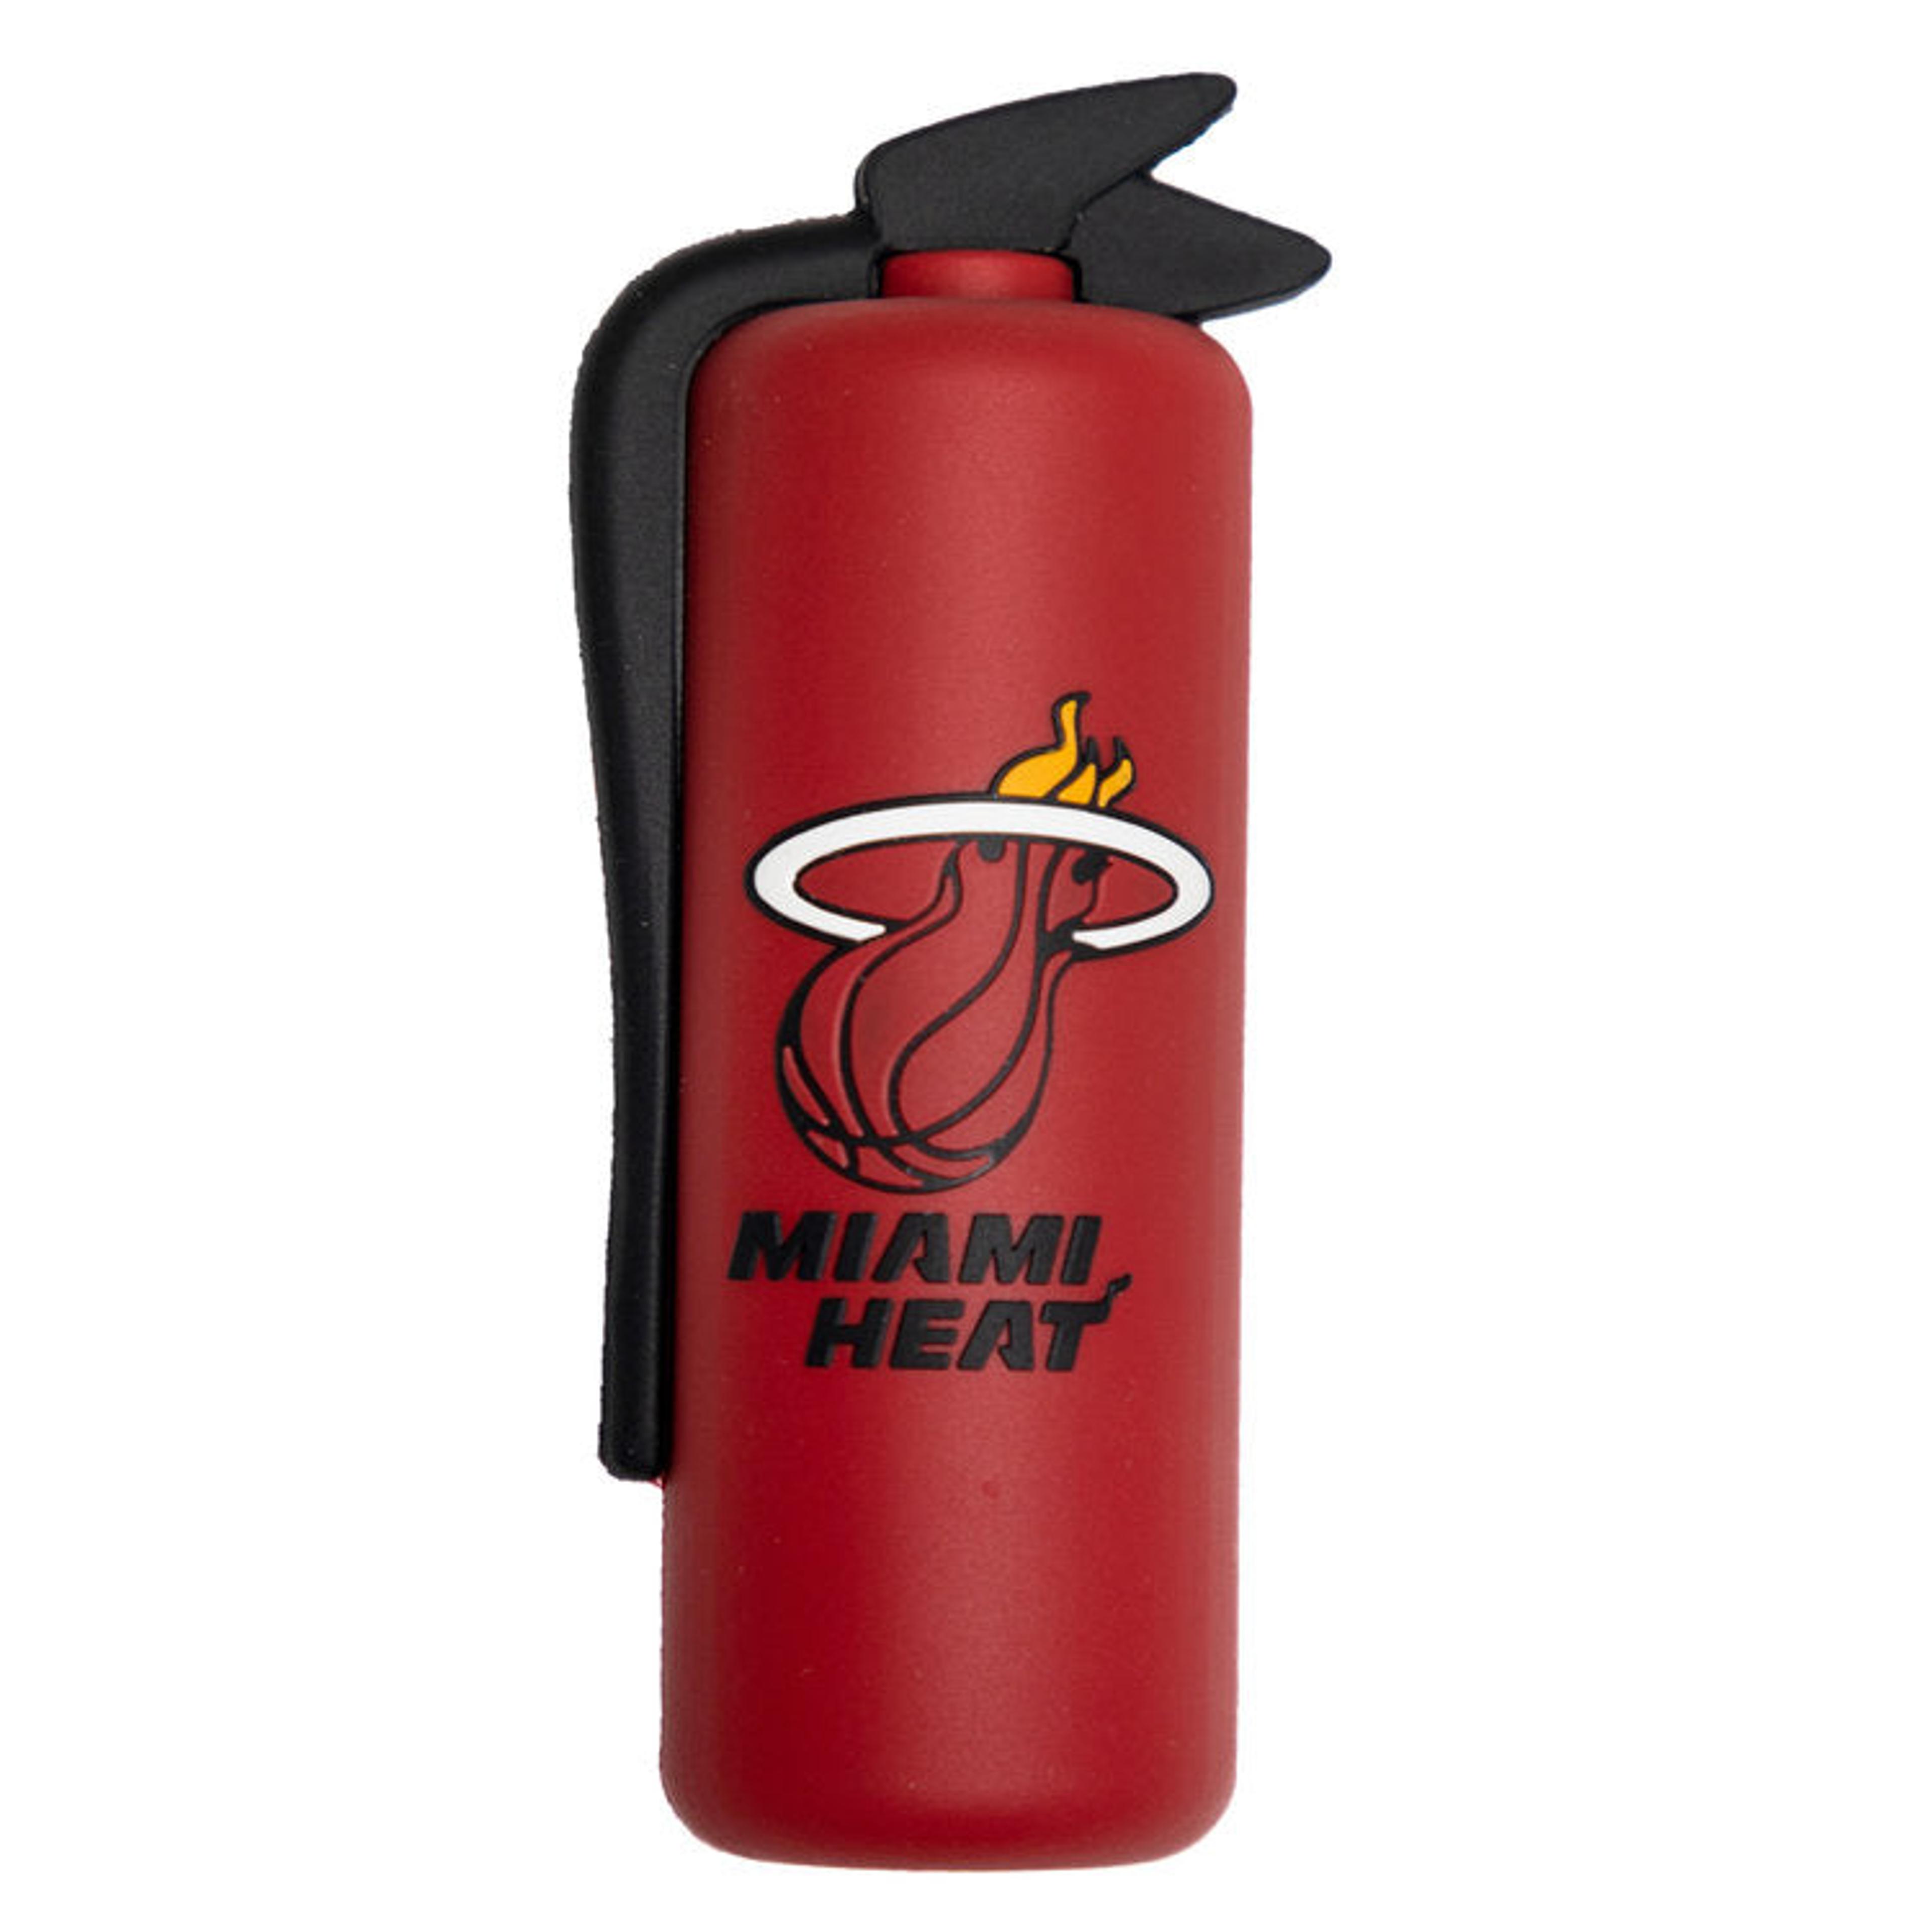 Stay Charged Up - Miami Heat Portable Charger